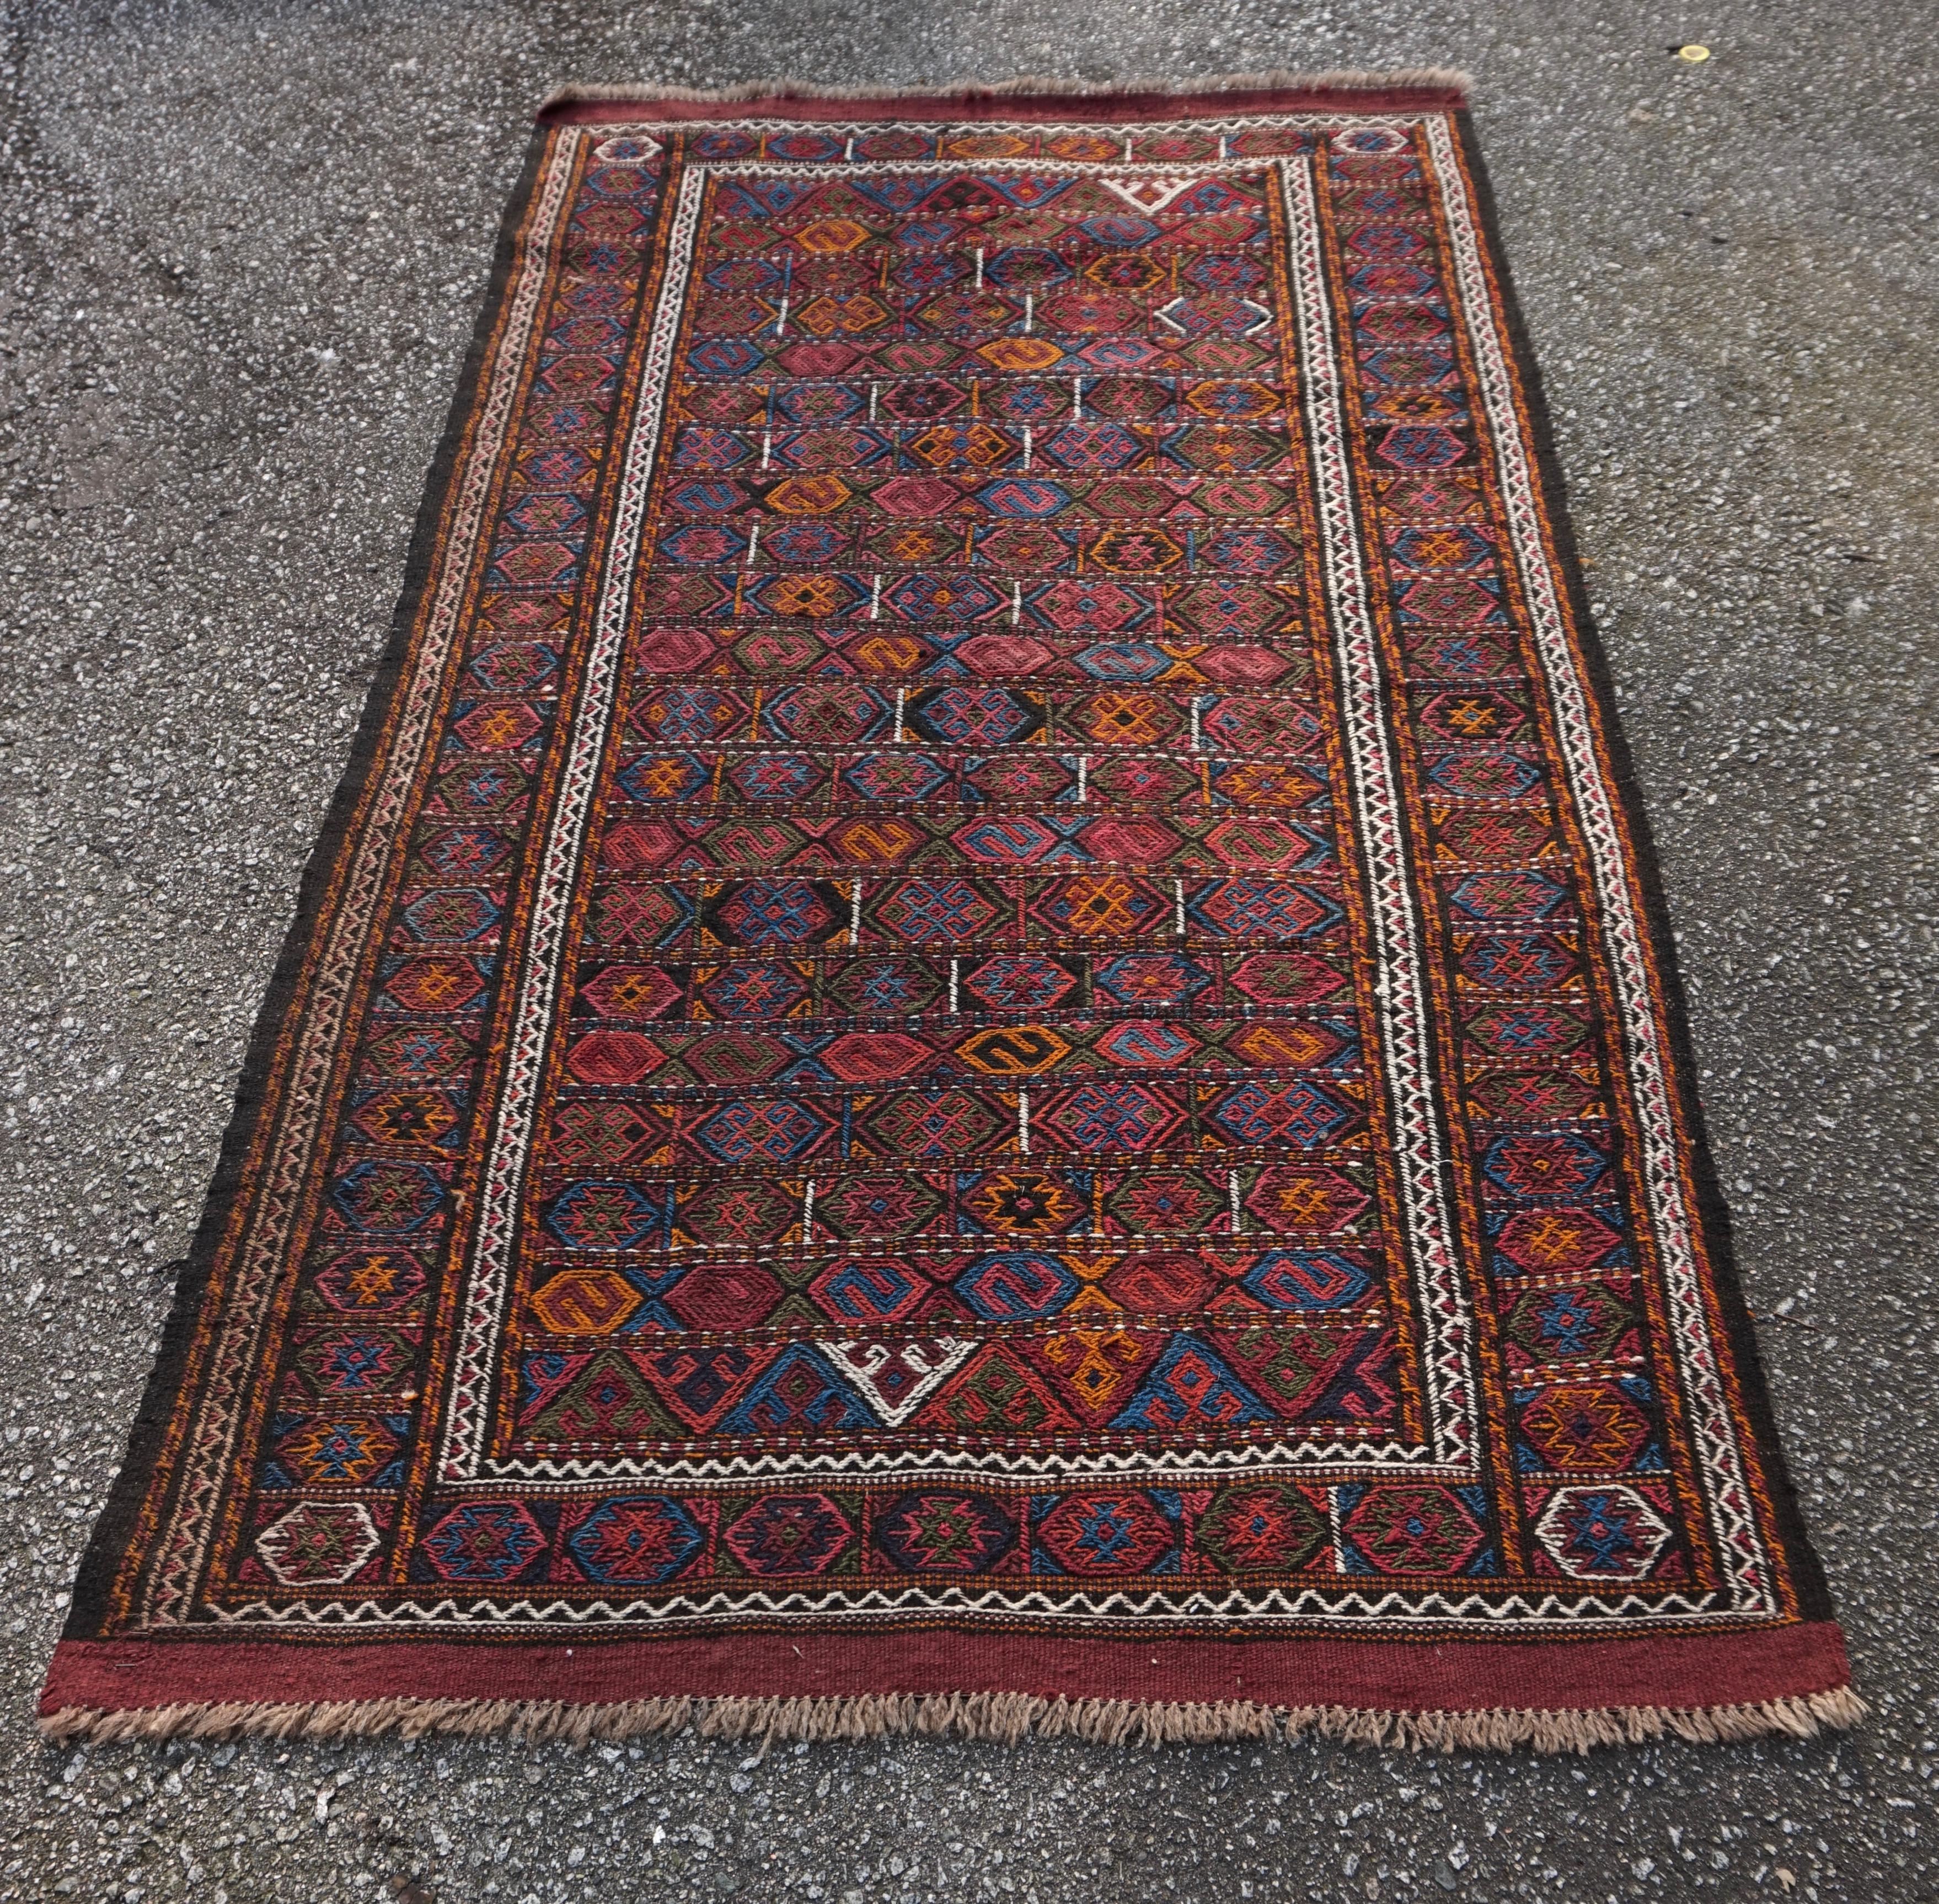 Rare Old Stock Hand-Knotted Central Asian Nomadic Tribal Flat-Weave Kilim In Good Condition For Sale In Vancouver, British Columbia